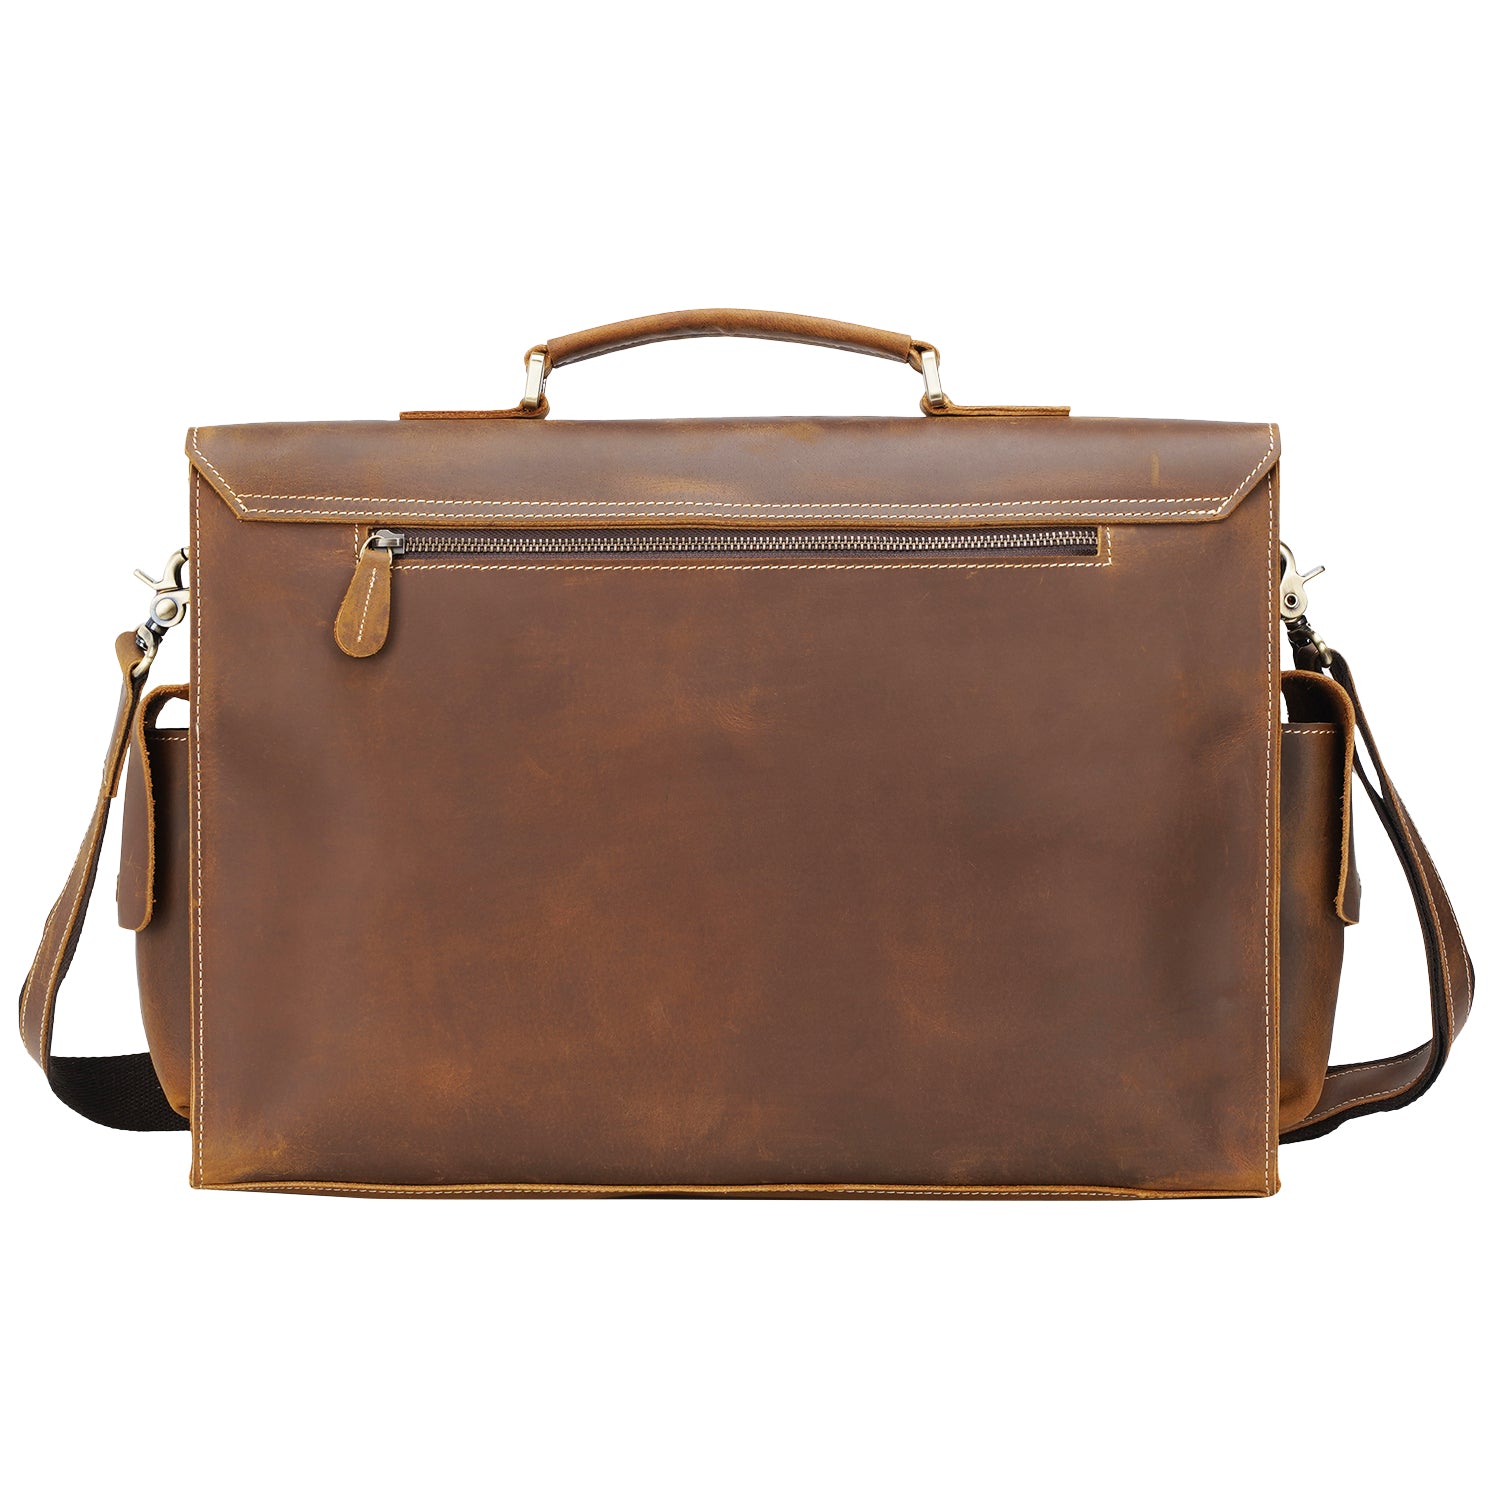 Briefcaselaptopin Jaquard and Genuine Leather With External 